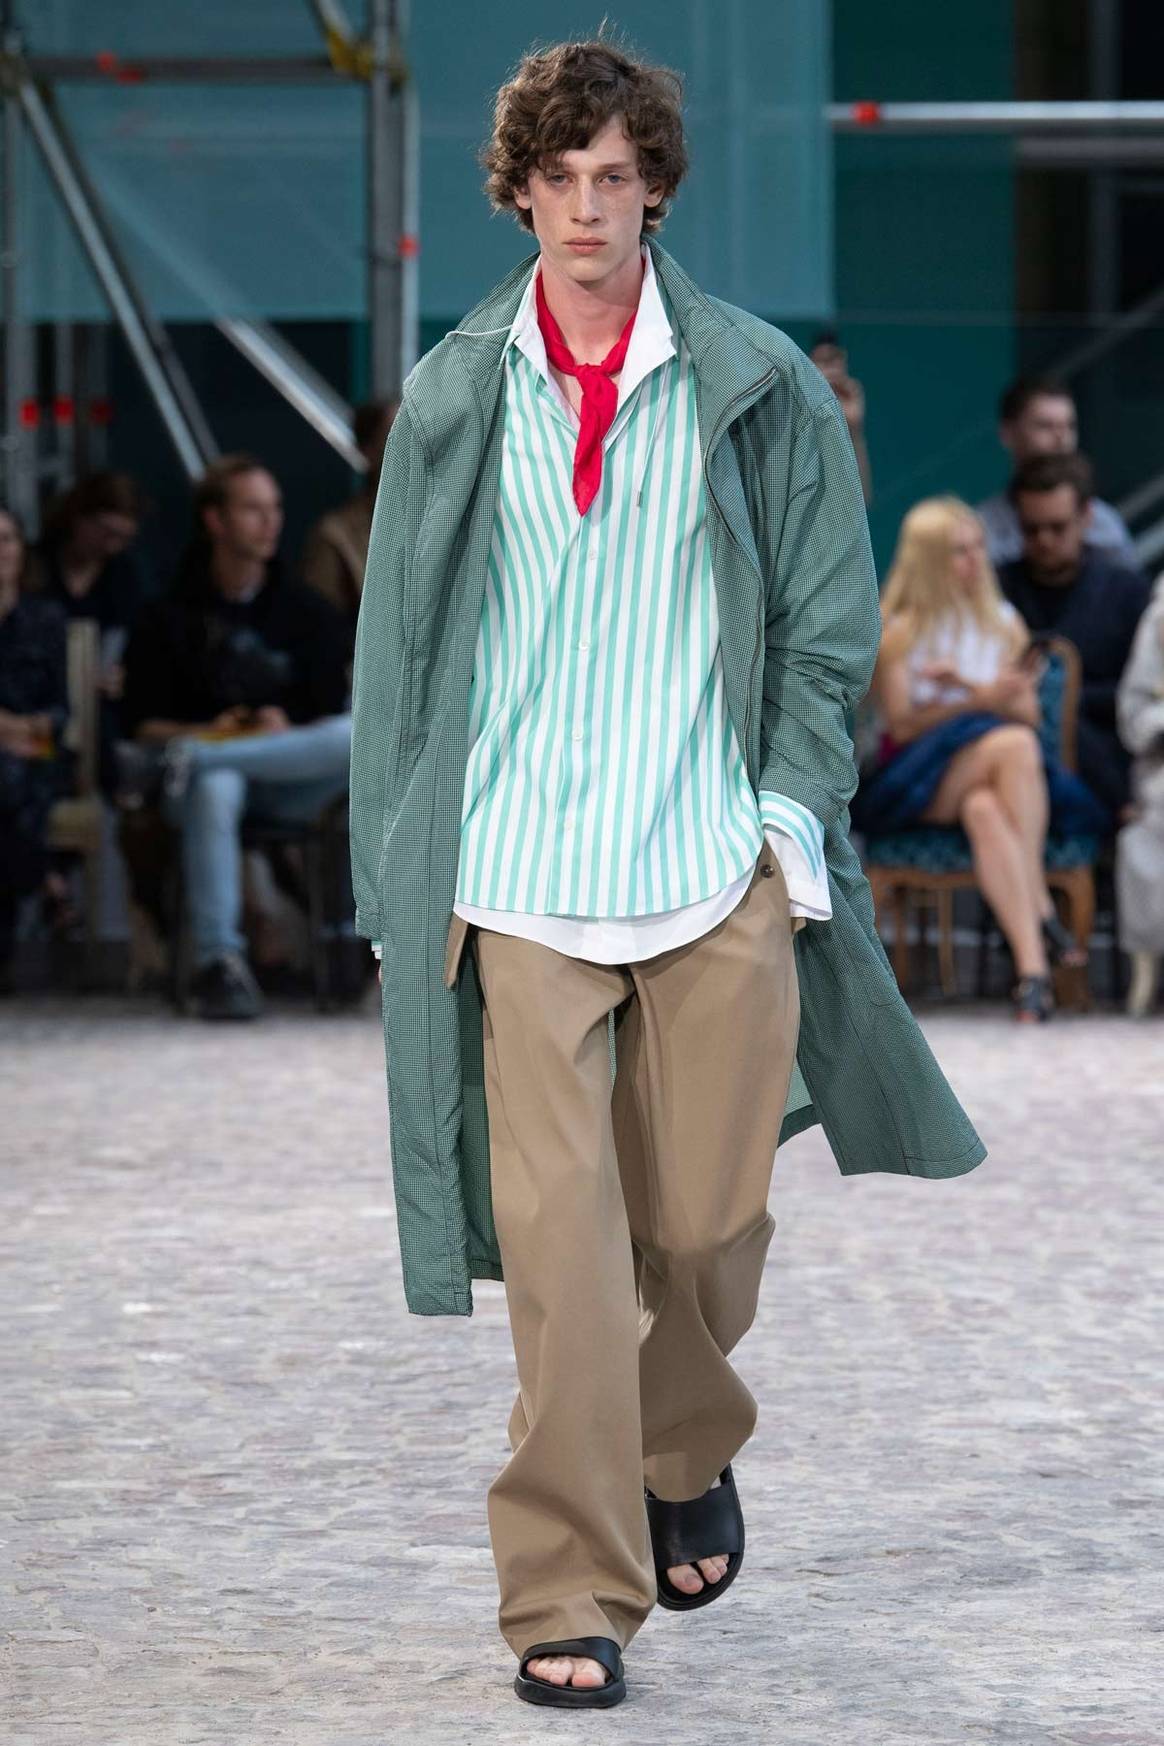 In pictures: Hermès brings summery nonchalance to PFWM